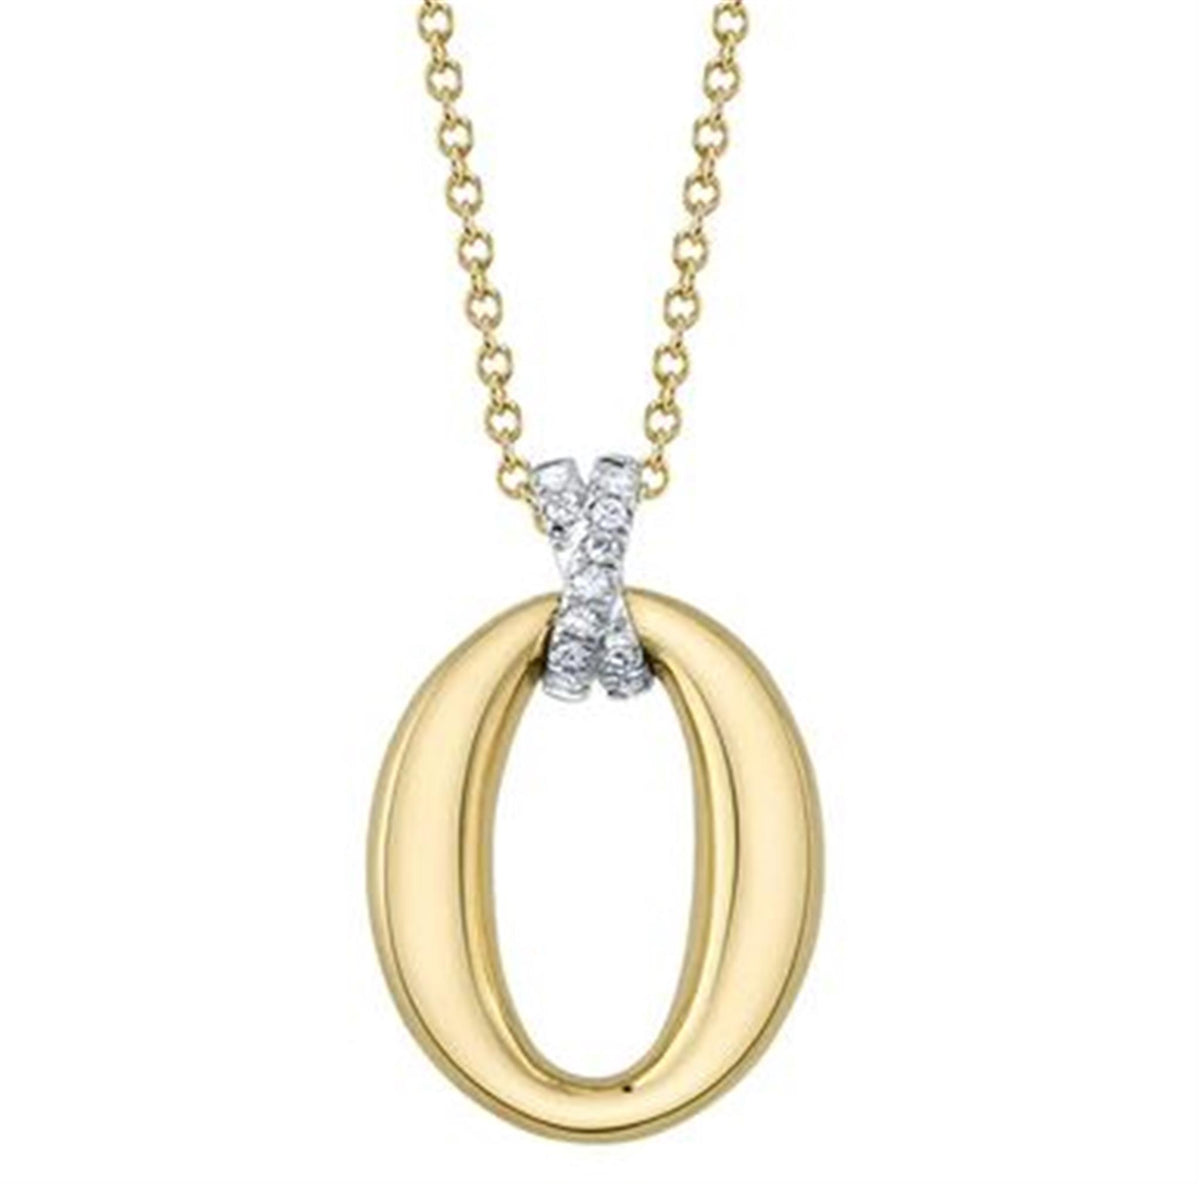 Shy Creation Gold Oval Pendant with Diamond Bail